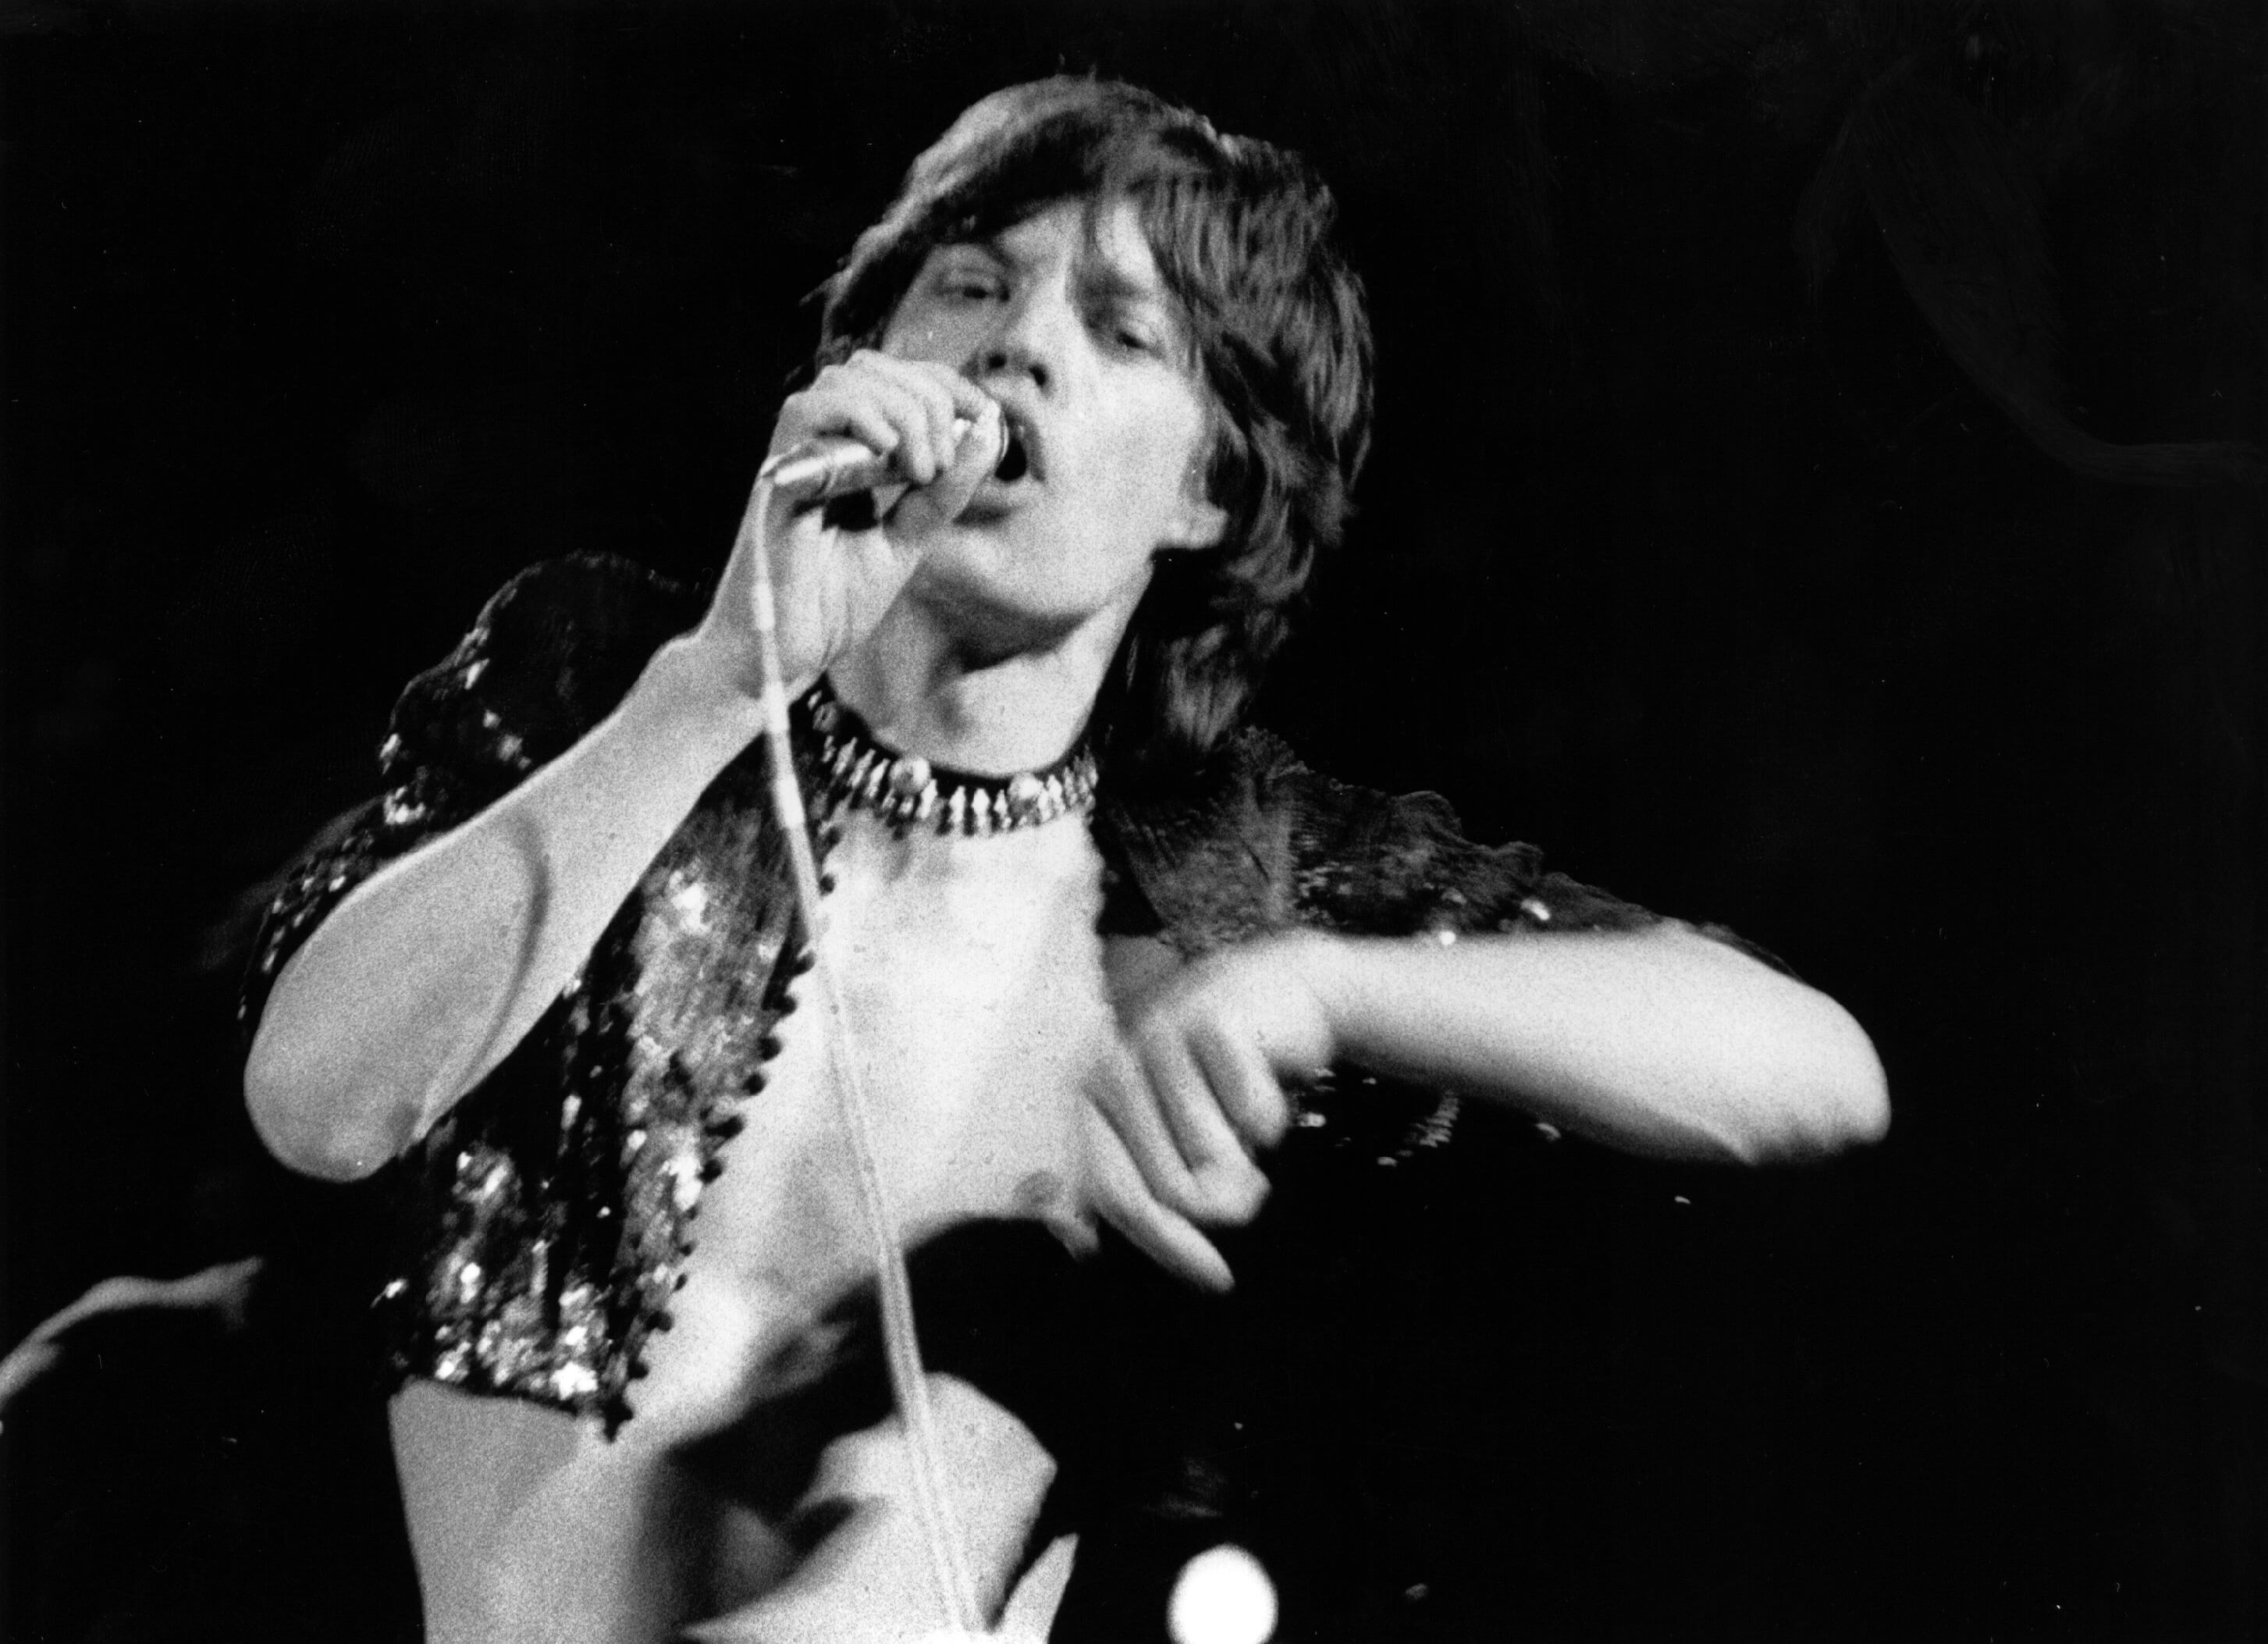 Mick Jagger with a microphone during The Rolling Stones' "Wild Horses" era